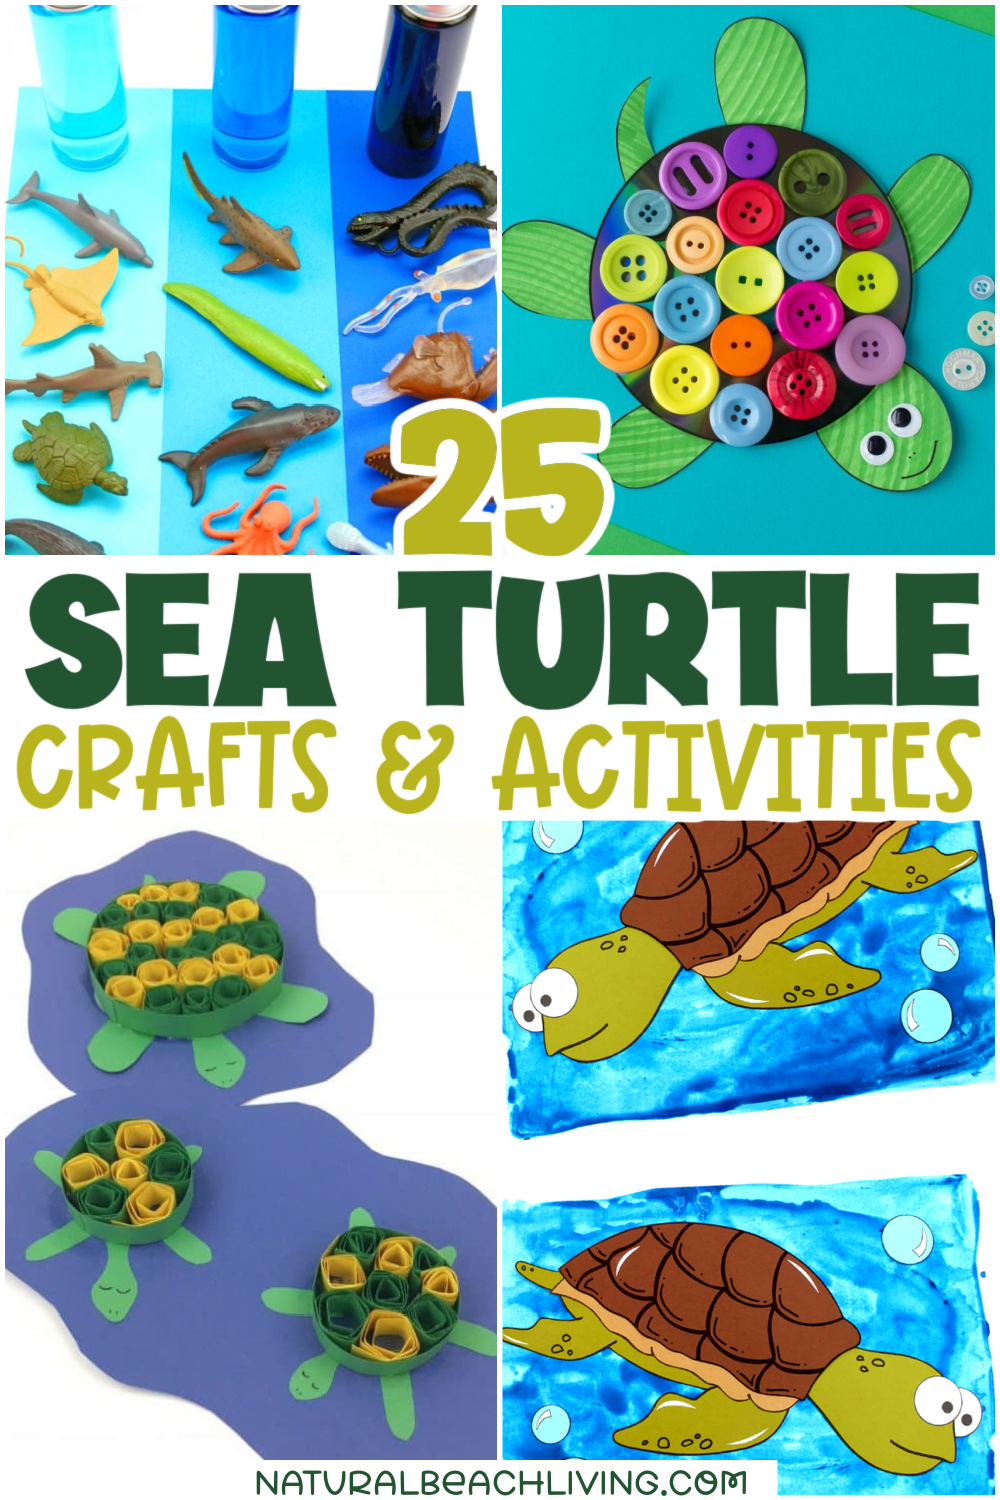 25+ Sea Turtle Crafts and Activities